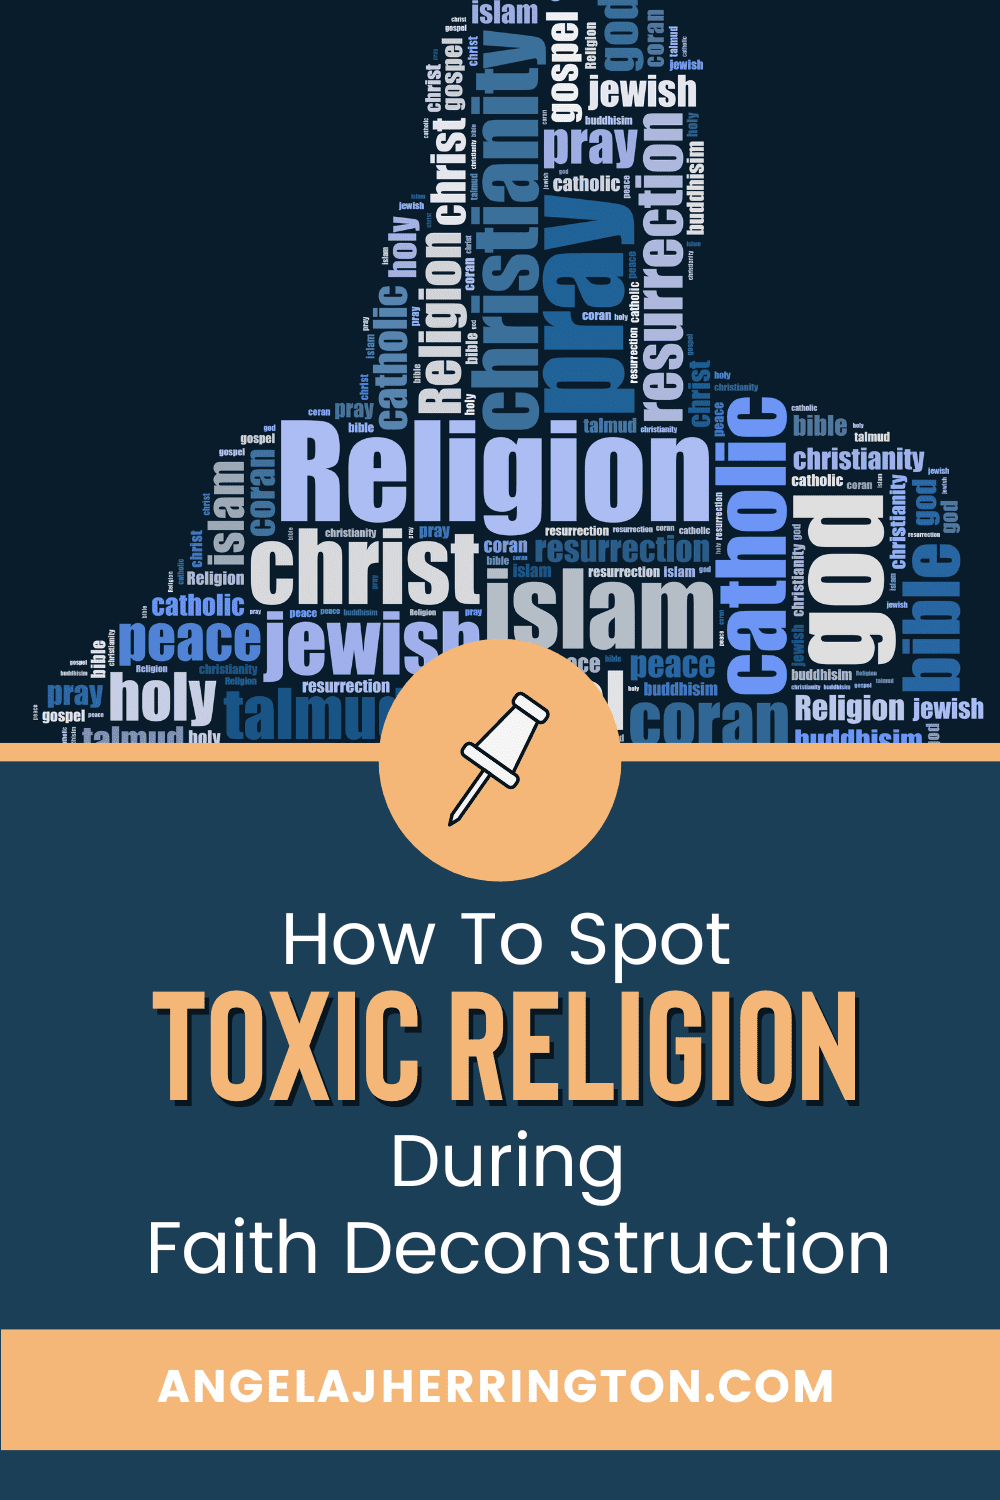 What is Toxic Religion?